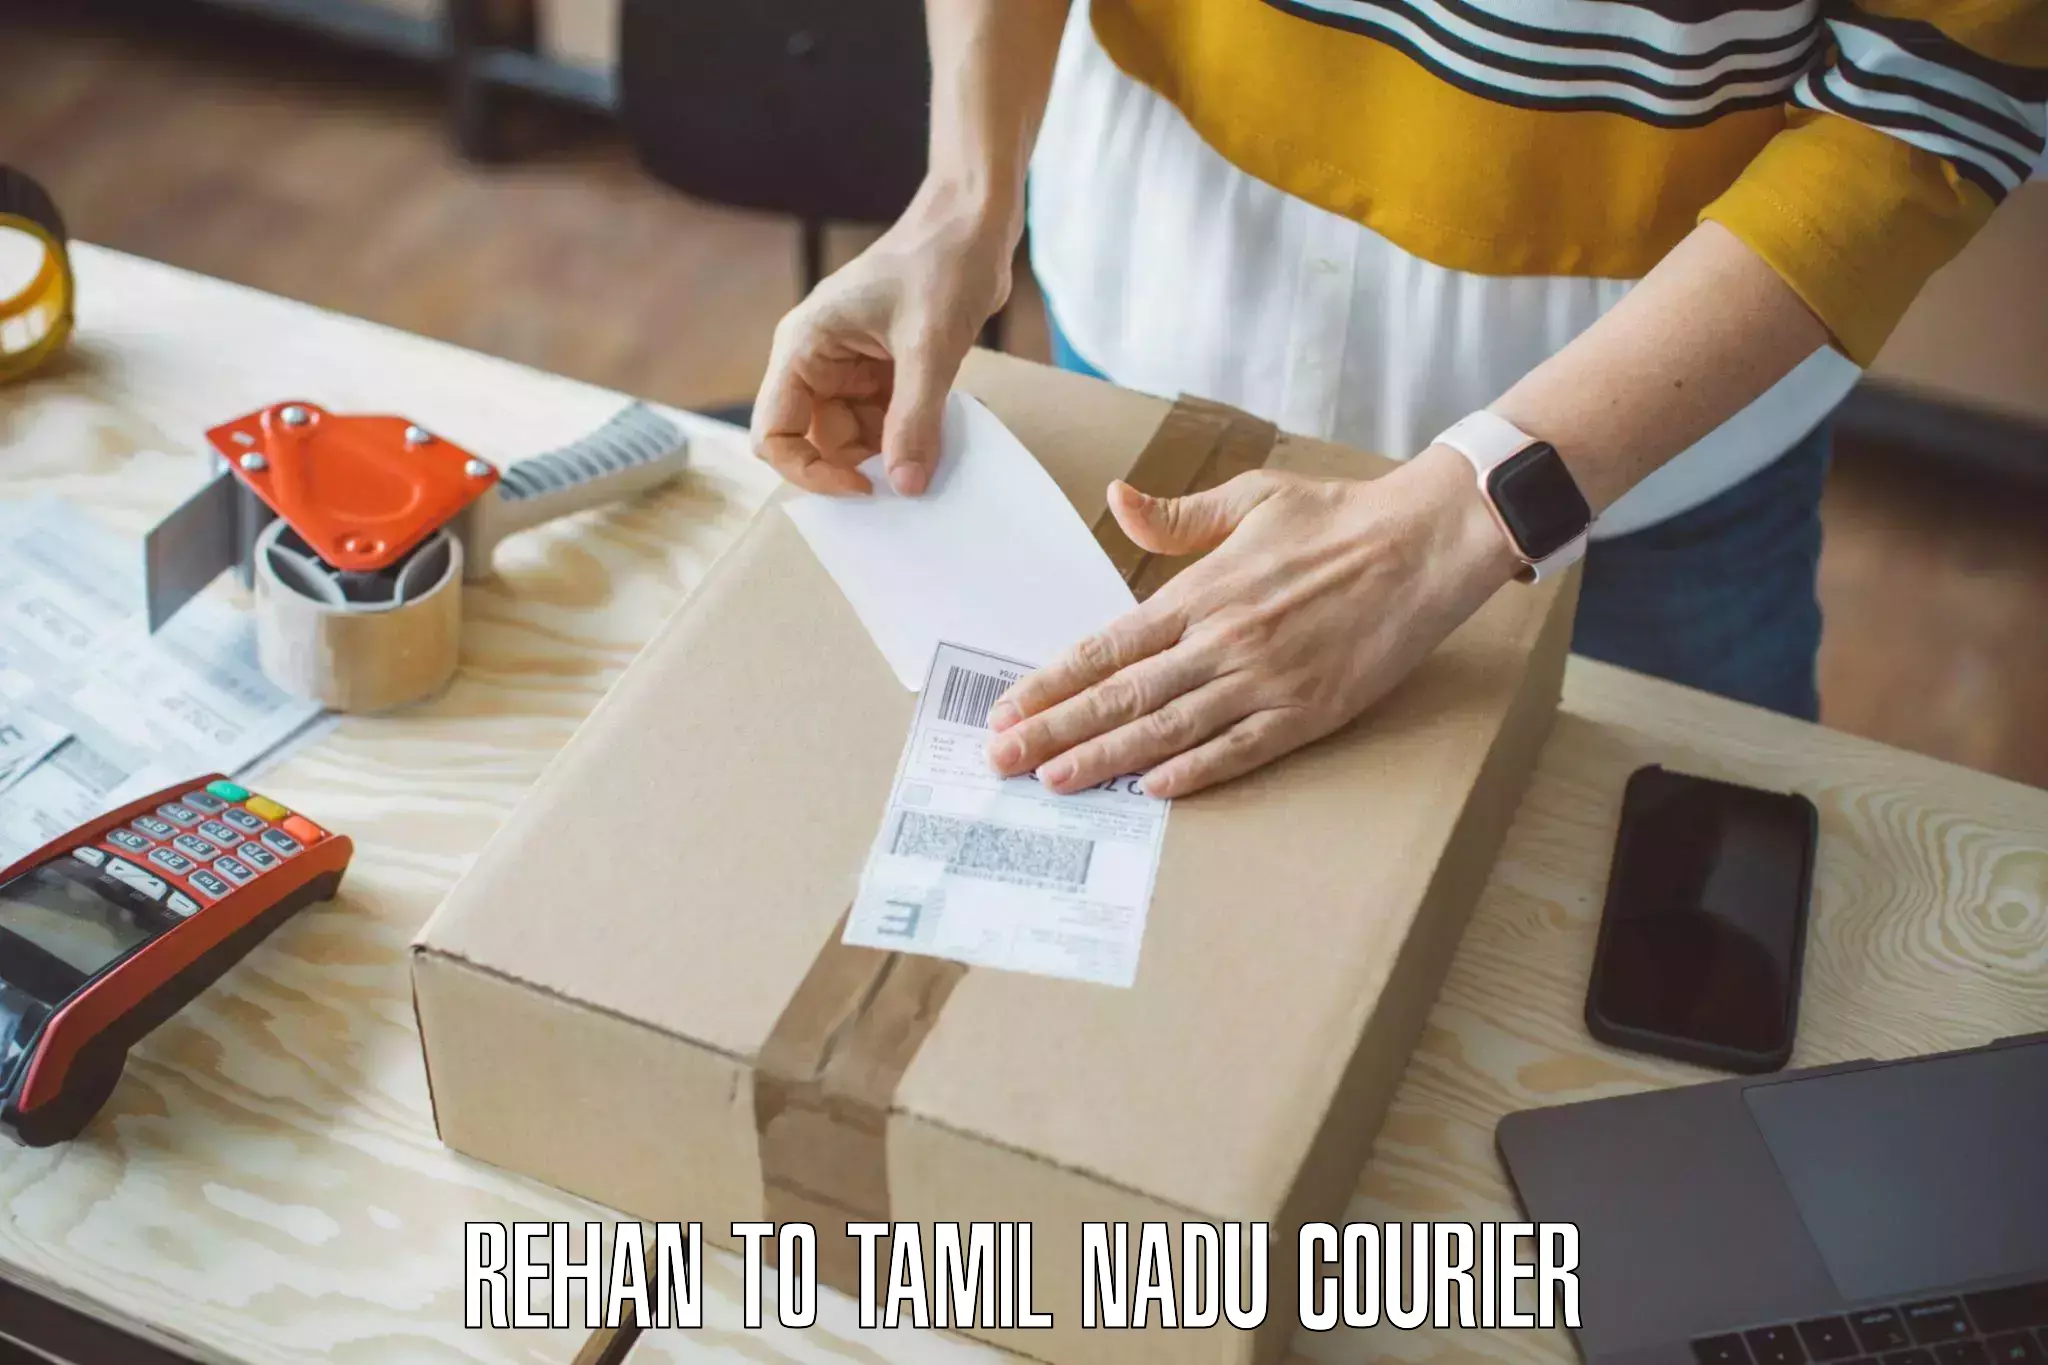 Furniture transport specialists in Rehan to University of Madras Chennai